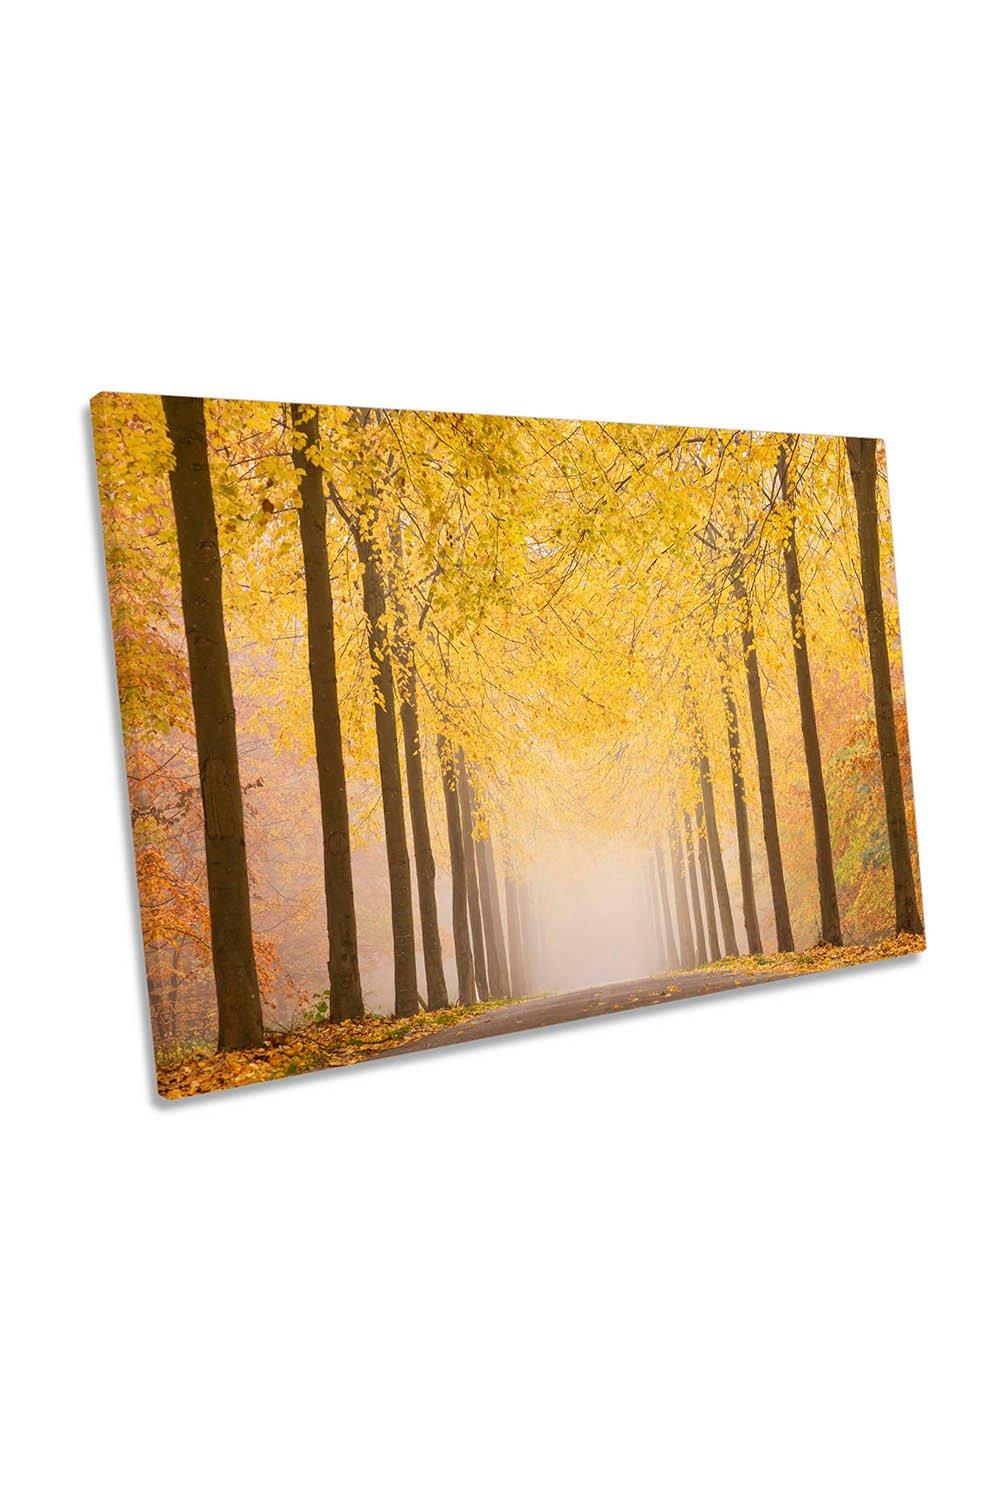 Autumn Yellow Road Misty Trees Canvas Wall Art Picture Print